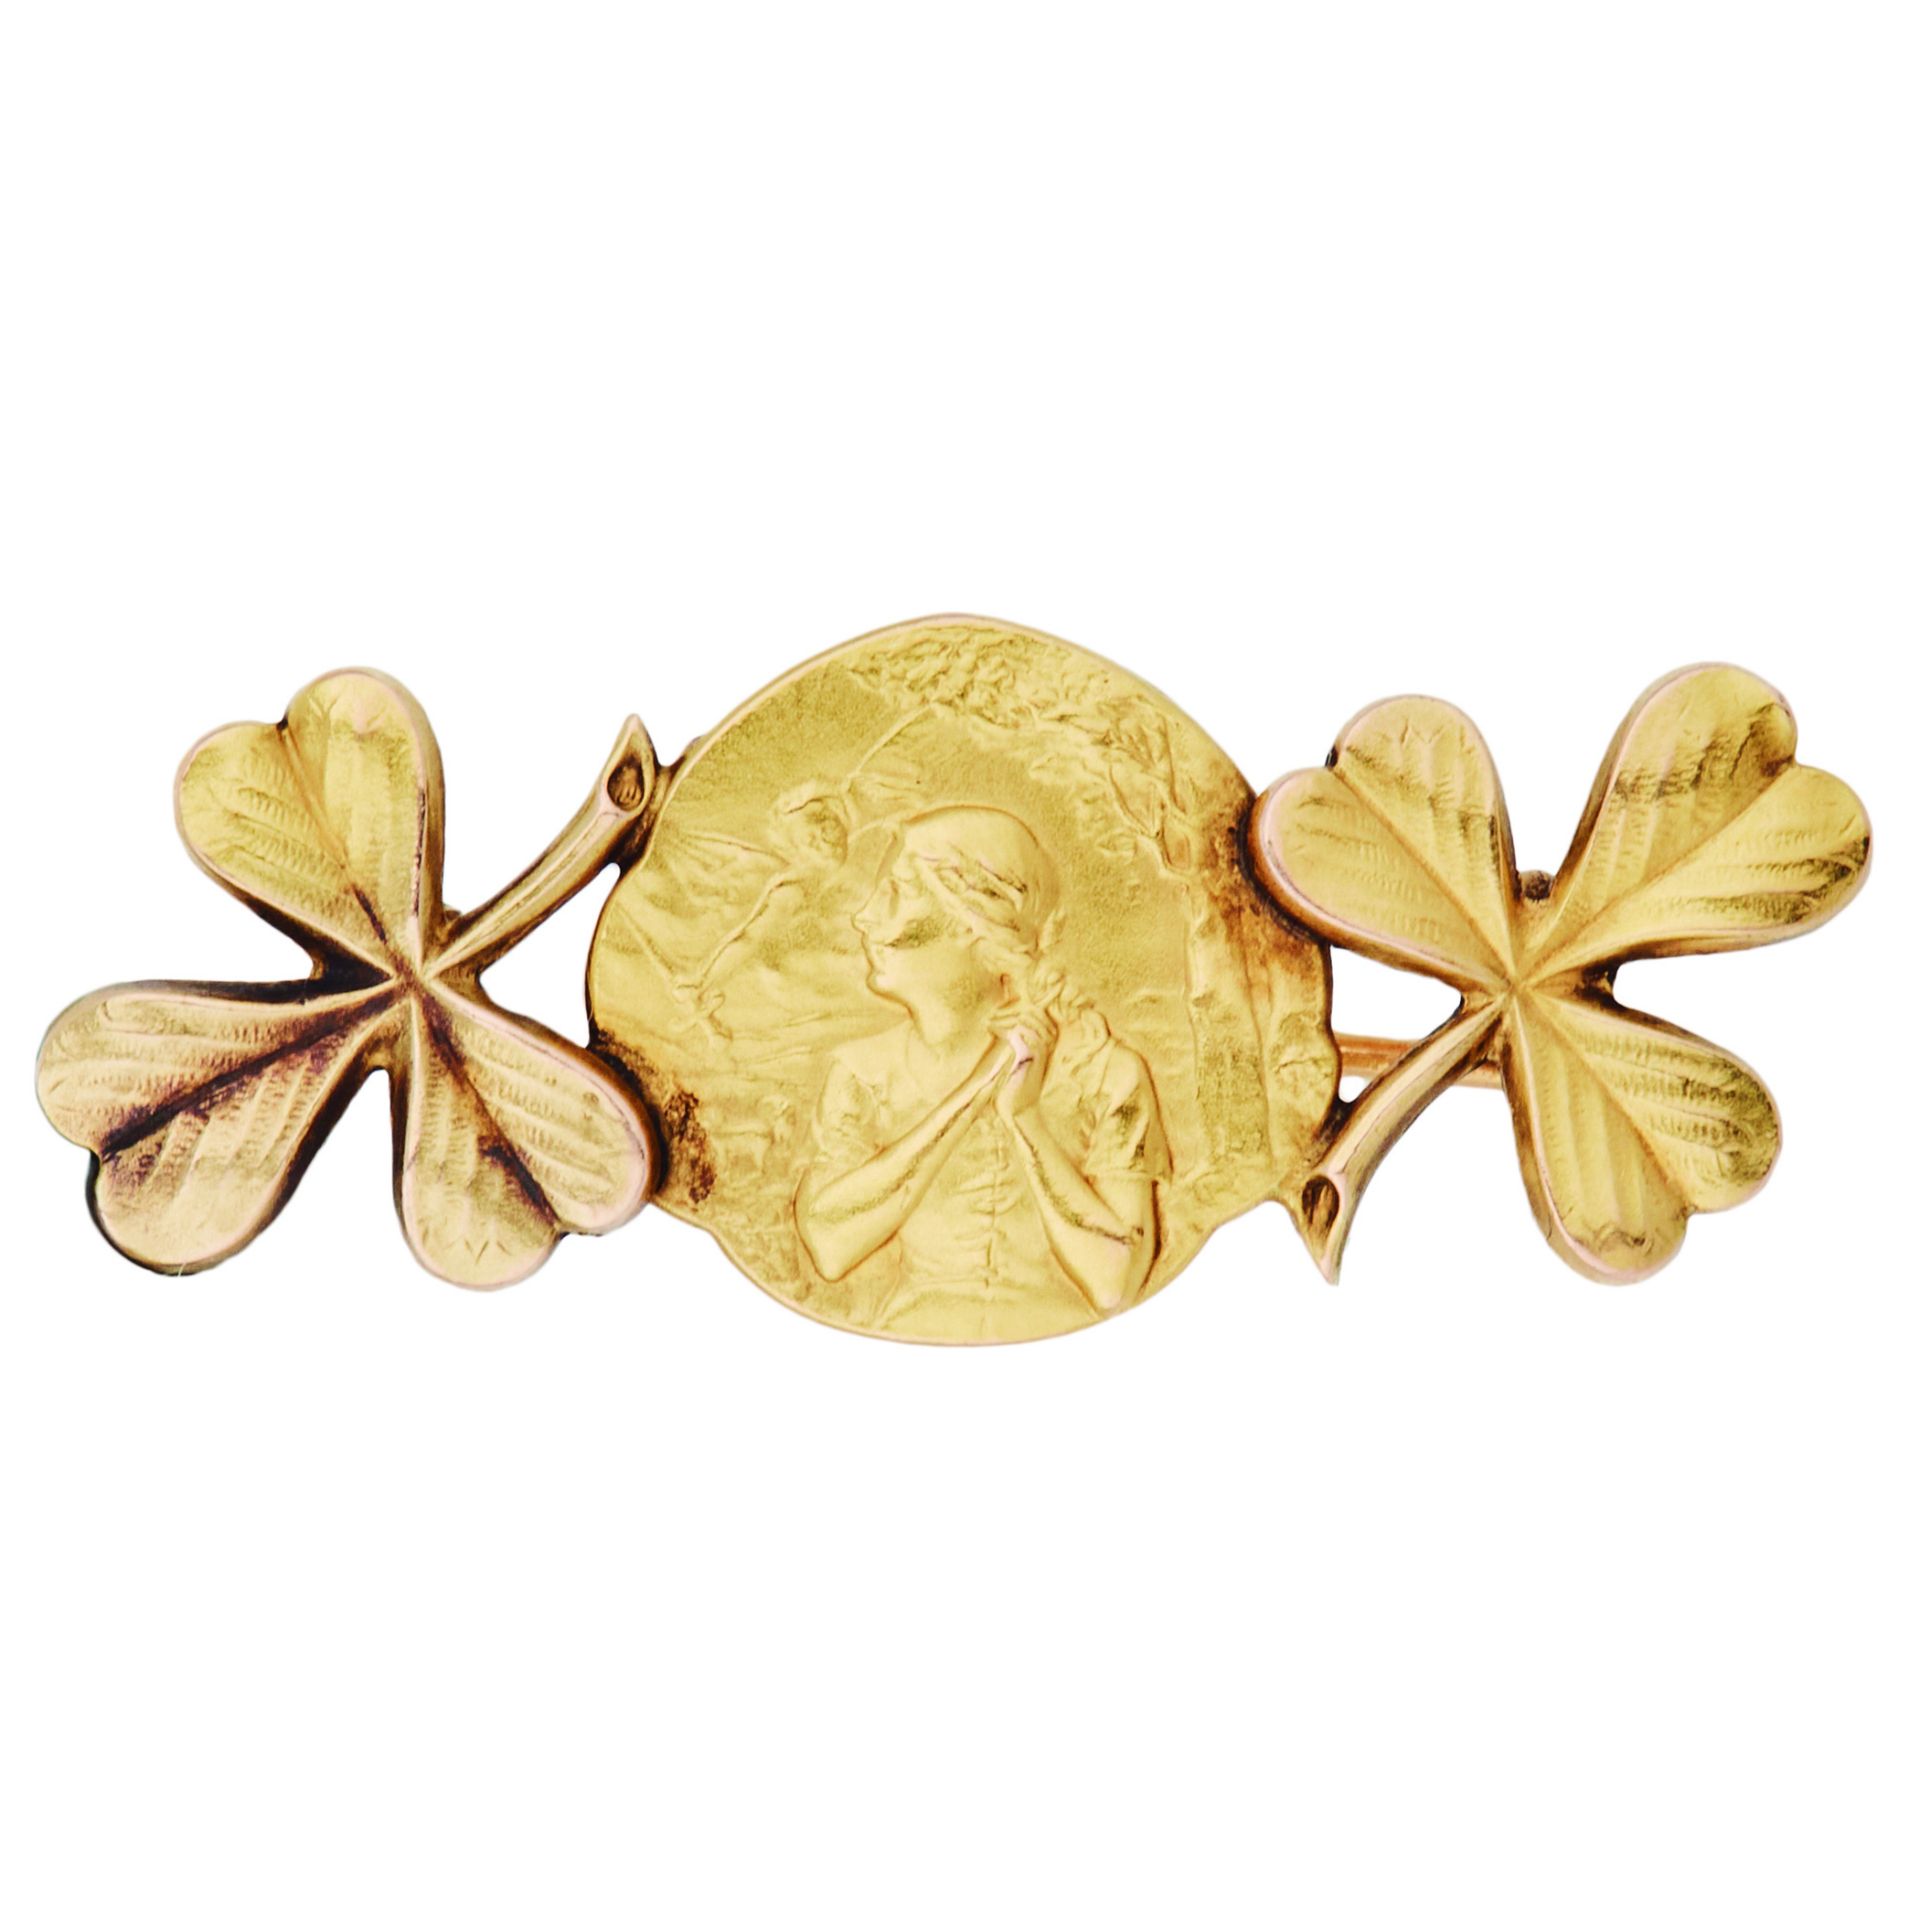 Modernist gold brooch, early 20th century.